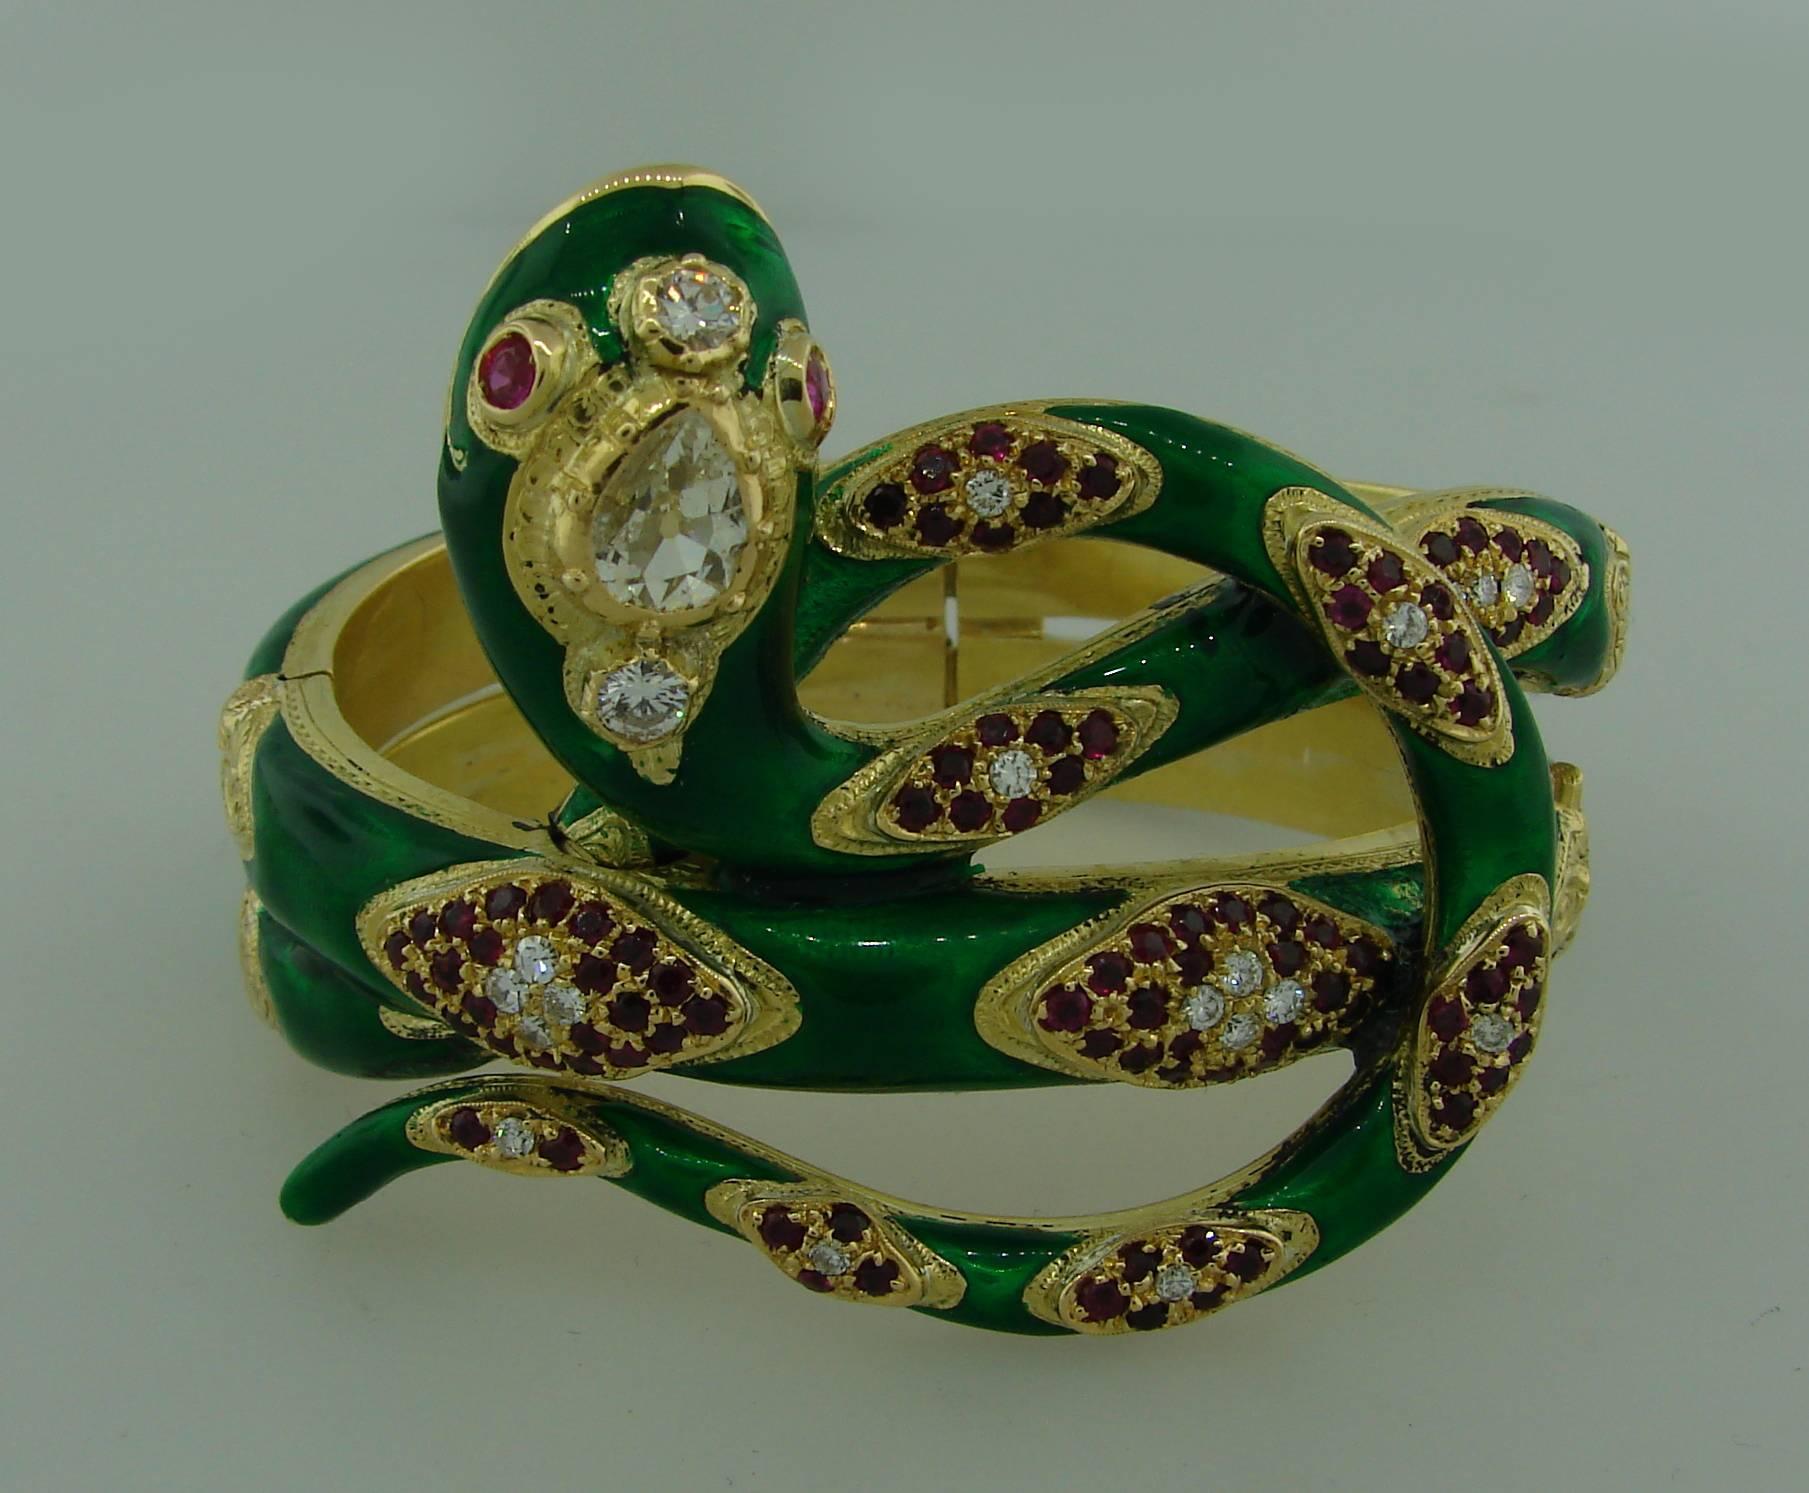 Stunning snake bracelet created by a famous Venetian jeweler Giulio Nardi in the 1950's. As people were fascinated by snakes for many-many years, this motif has been widely used in jewelry since ancient times till nowadays. This snake bracelet is a